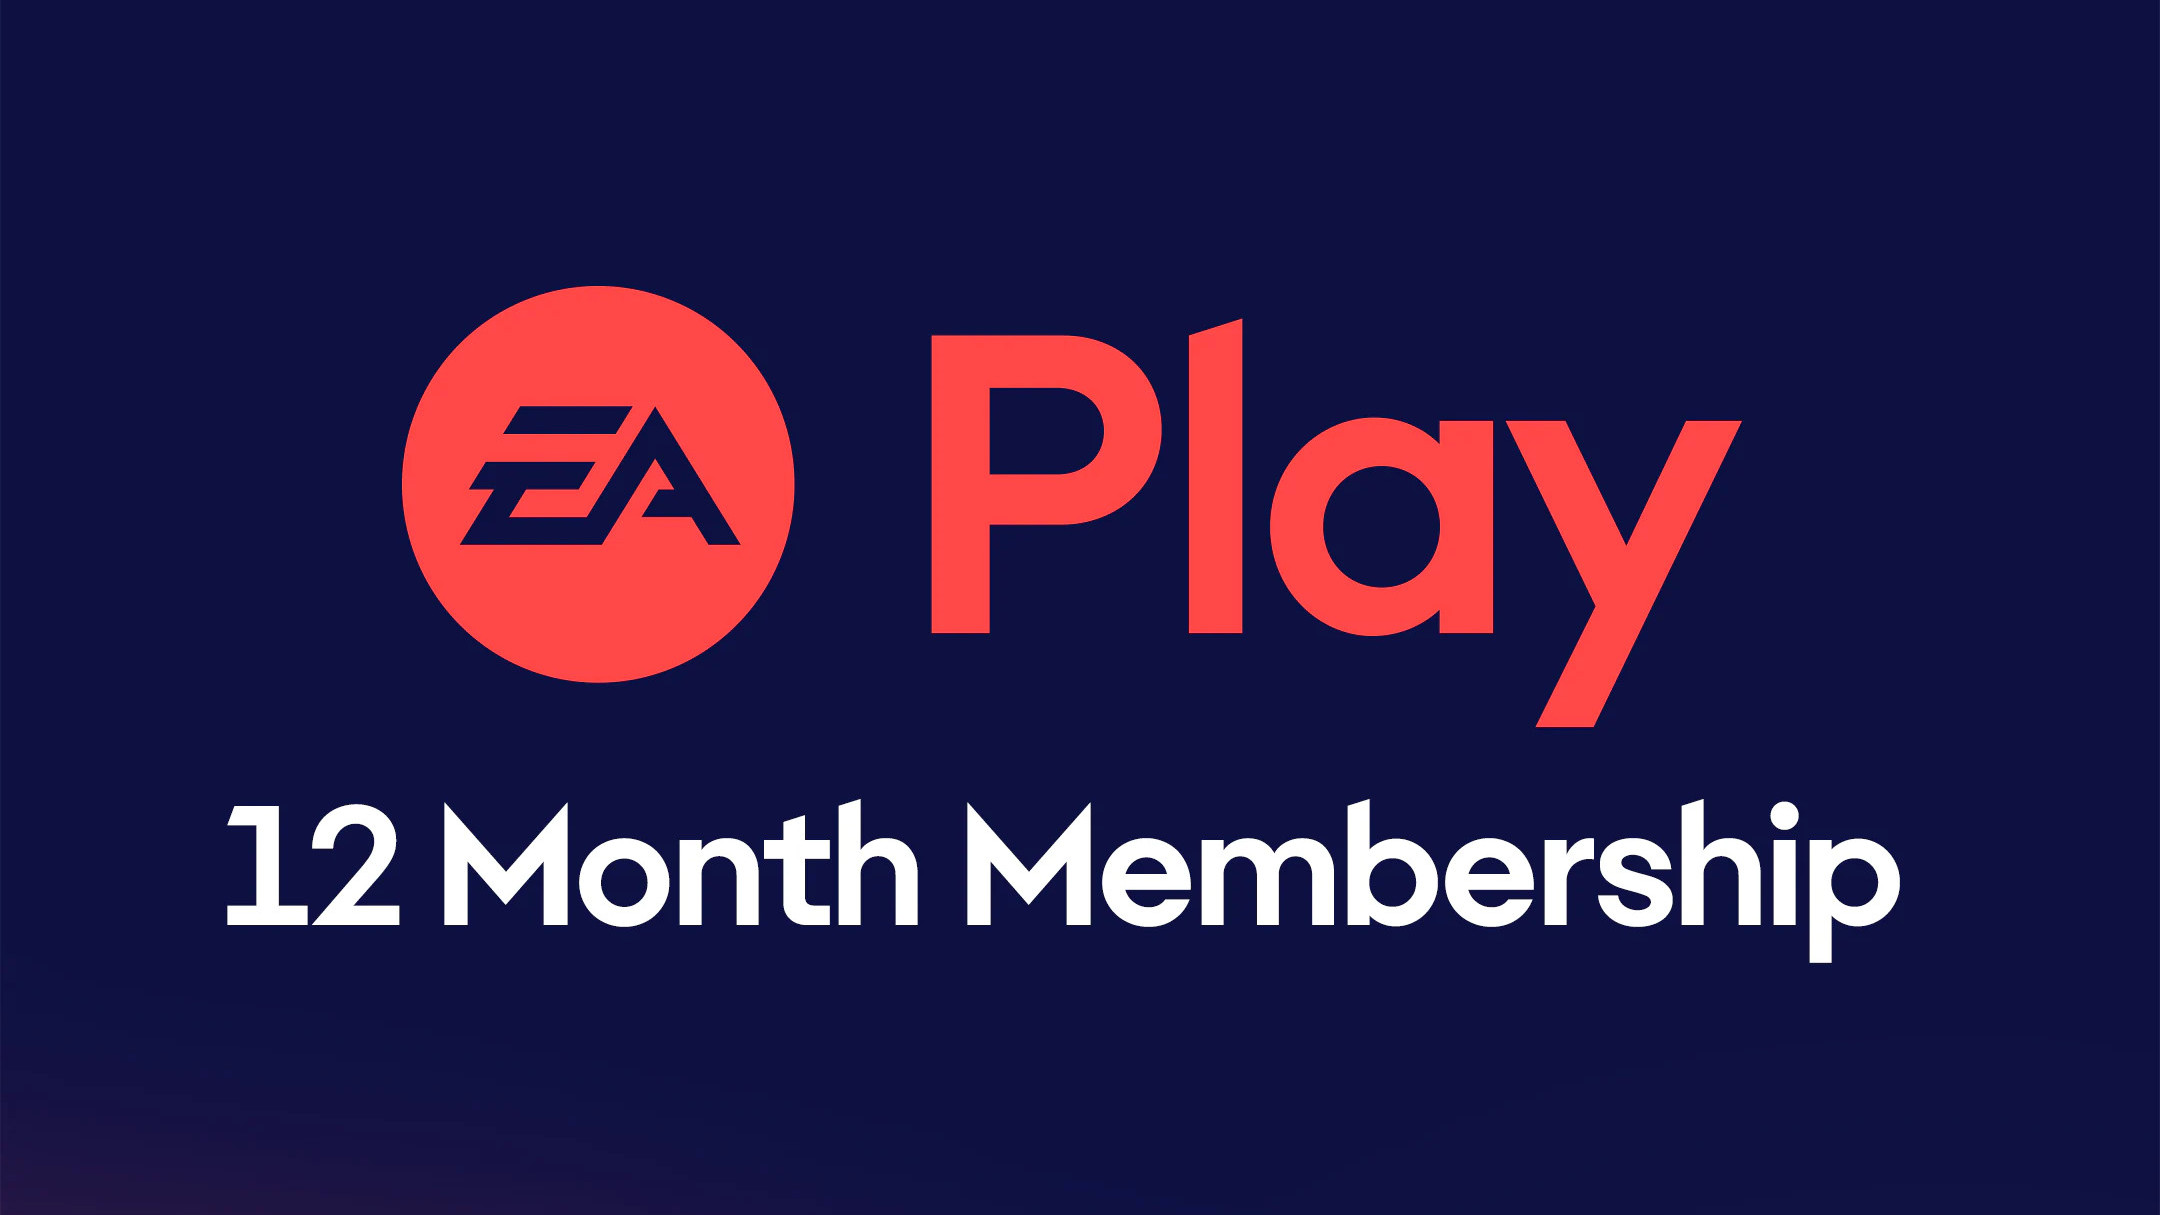 EA Play - 12 Months Subscription PlayStation 4/5 ACCOUNT, 22.53 usd